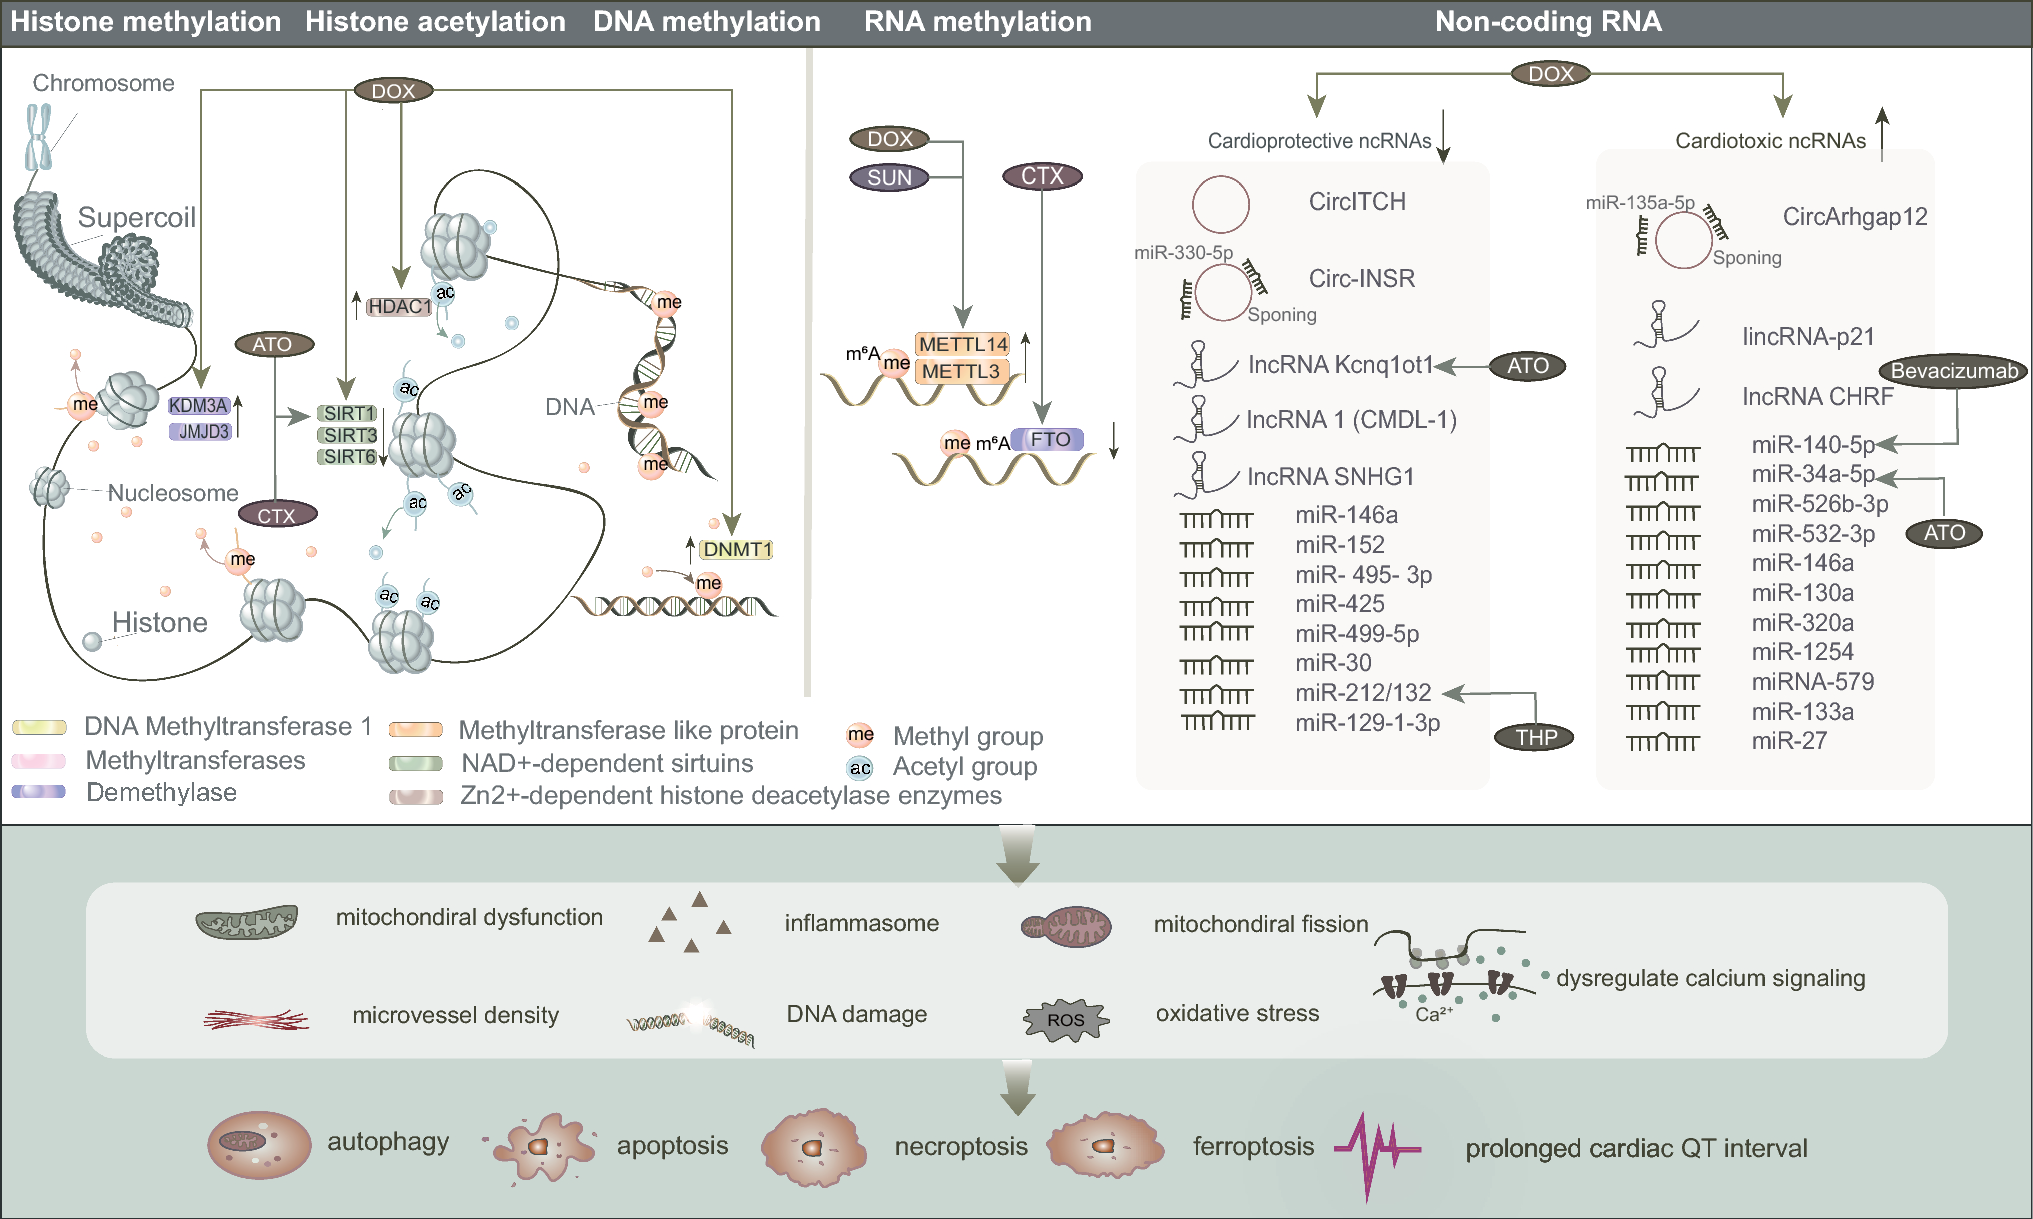 The role and mechanism of epigenetics in anticancer drug-induced cardiotoxicity